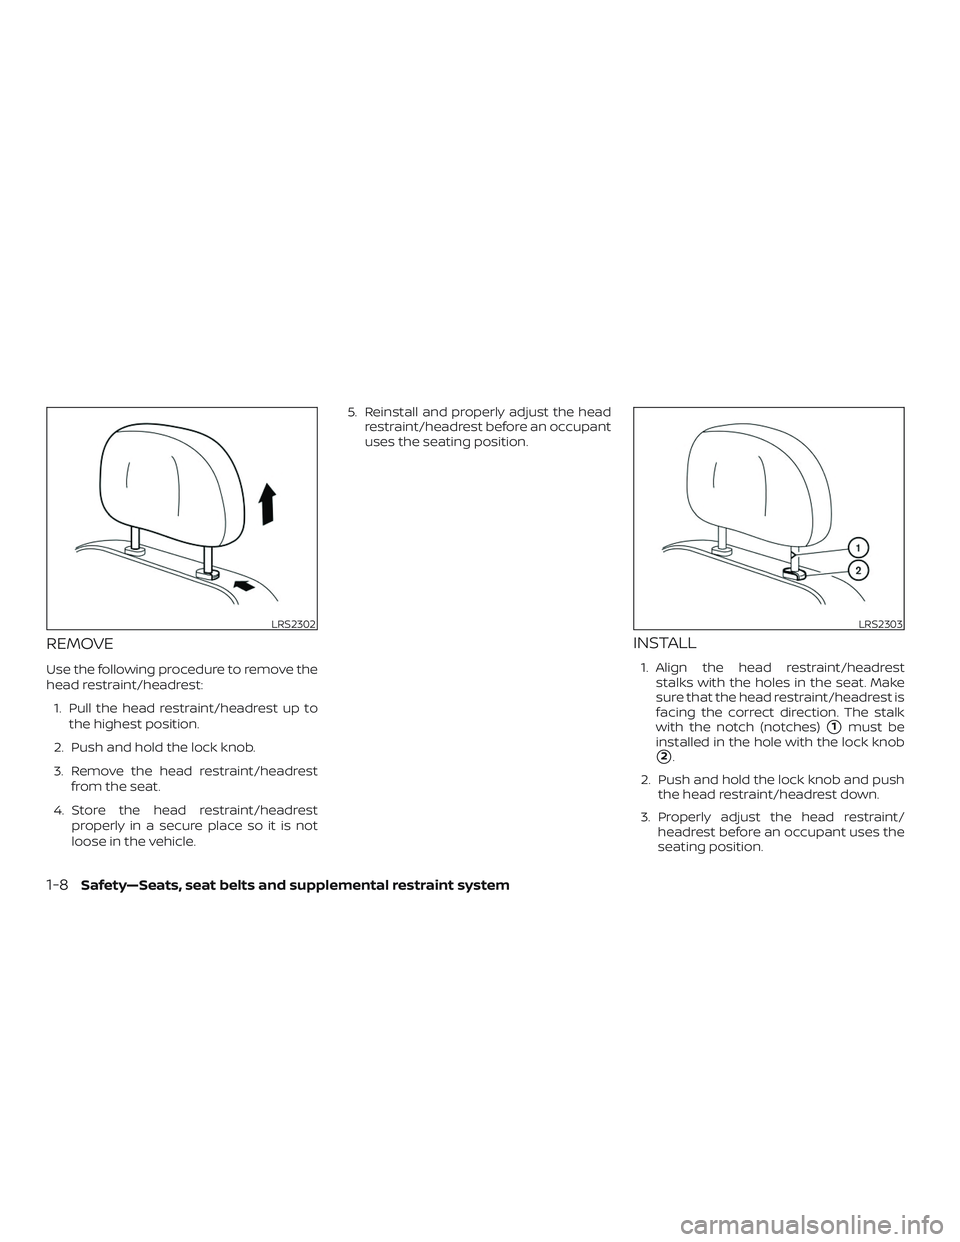 NISSAN MICRA 2018  Owner´s Manual REMOVE
Use the following procedure to remove the
head restraint/headrest:1. Pull the head restraint/headrest up to the highest position.
2. Push and hold the lock knob.
3. Remove the head restraint/he